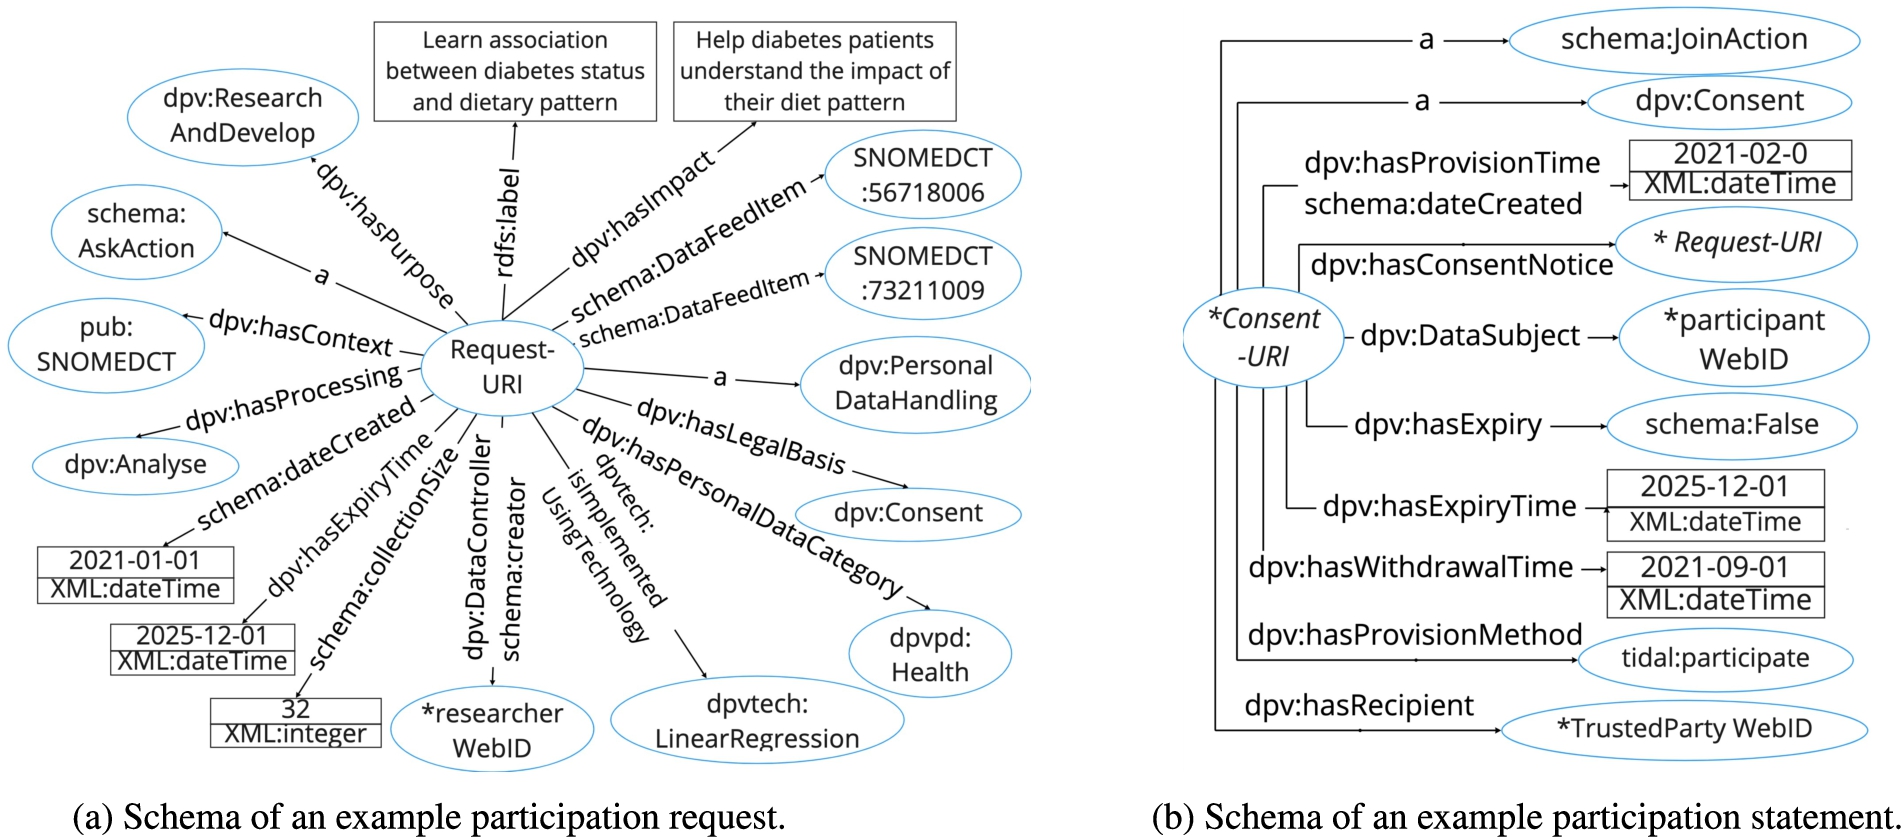 Schema of the participation request (from researchers) and participation statement (from participants).